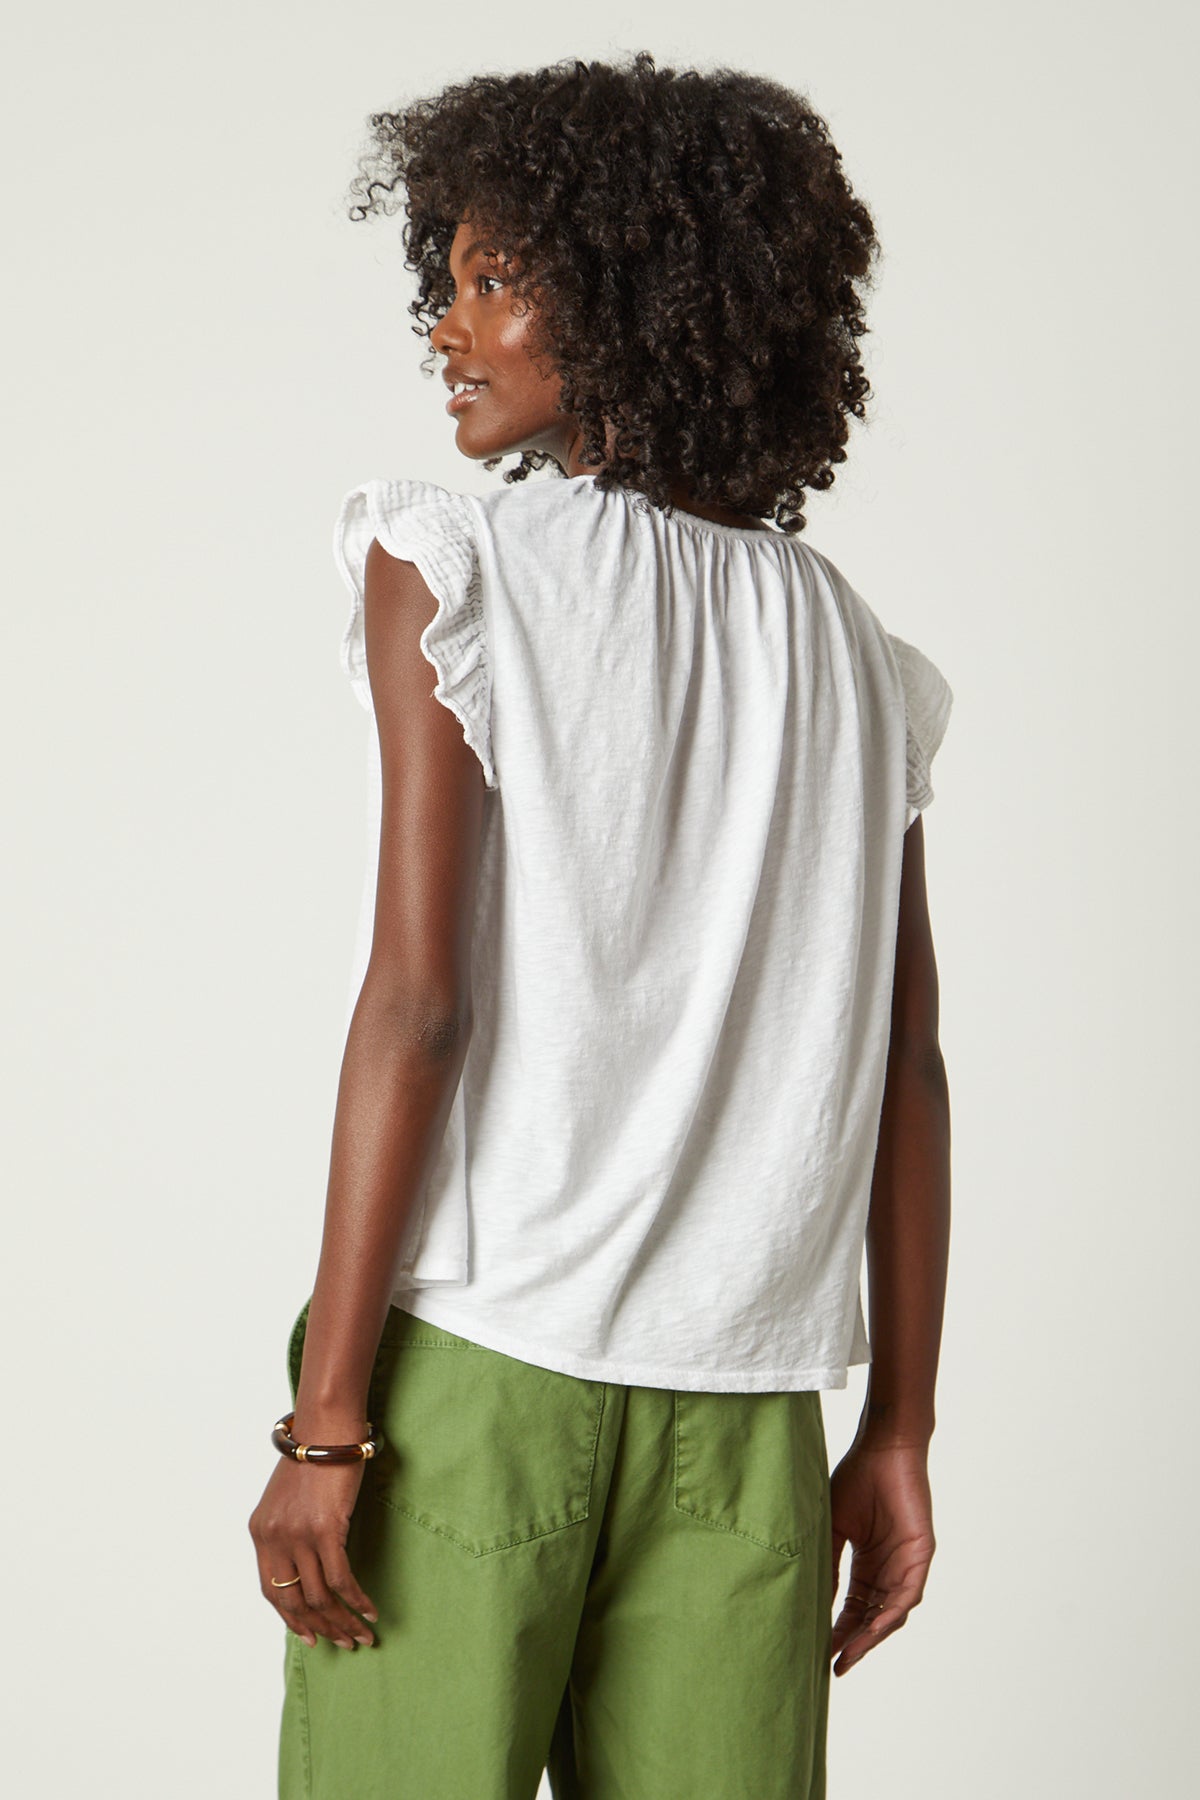 the back view of a woman wearing the Velvet by Graham & Spencer REMI RUFFLE SLEEVE TOP and green pants.-26631973798081